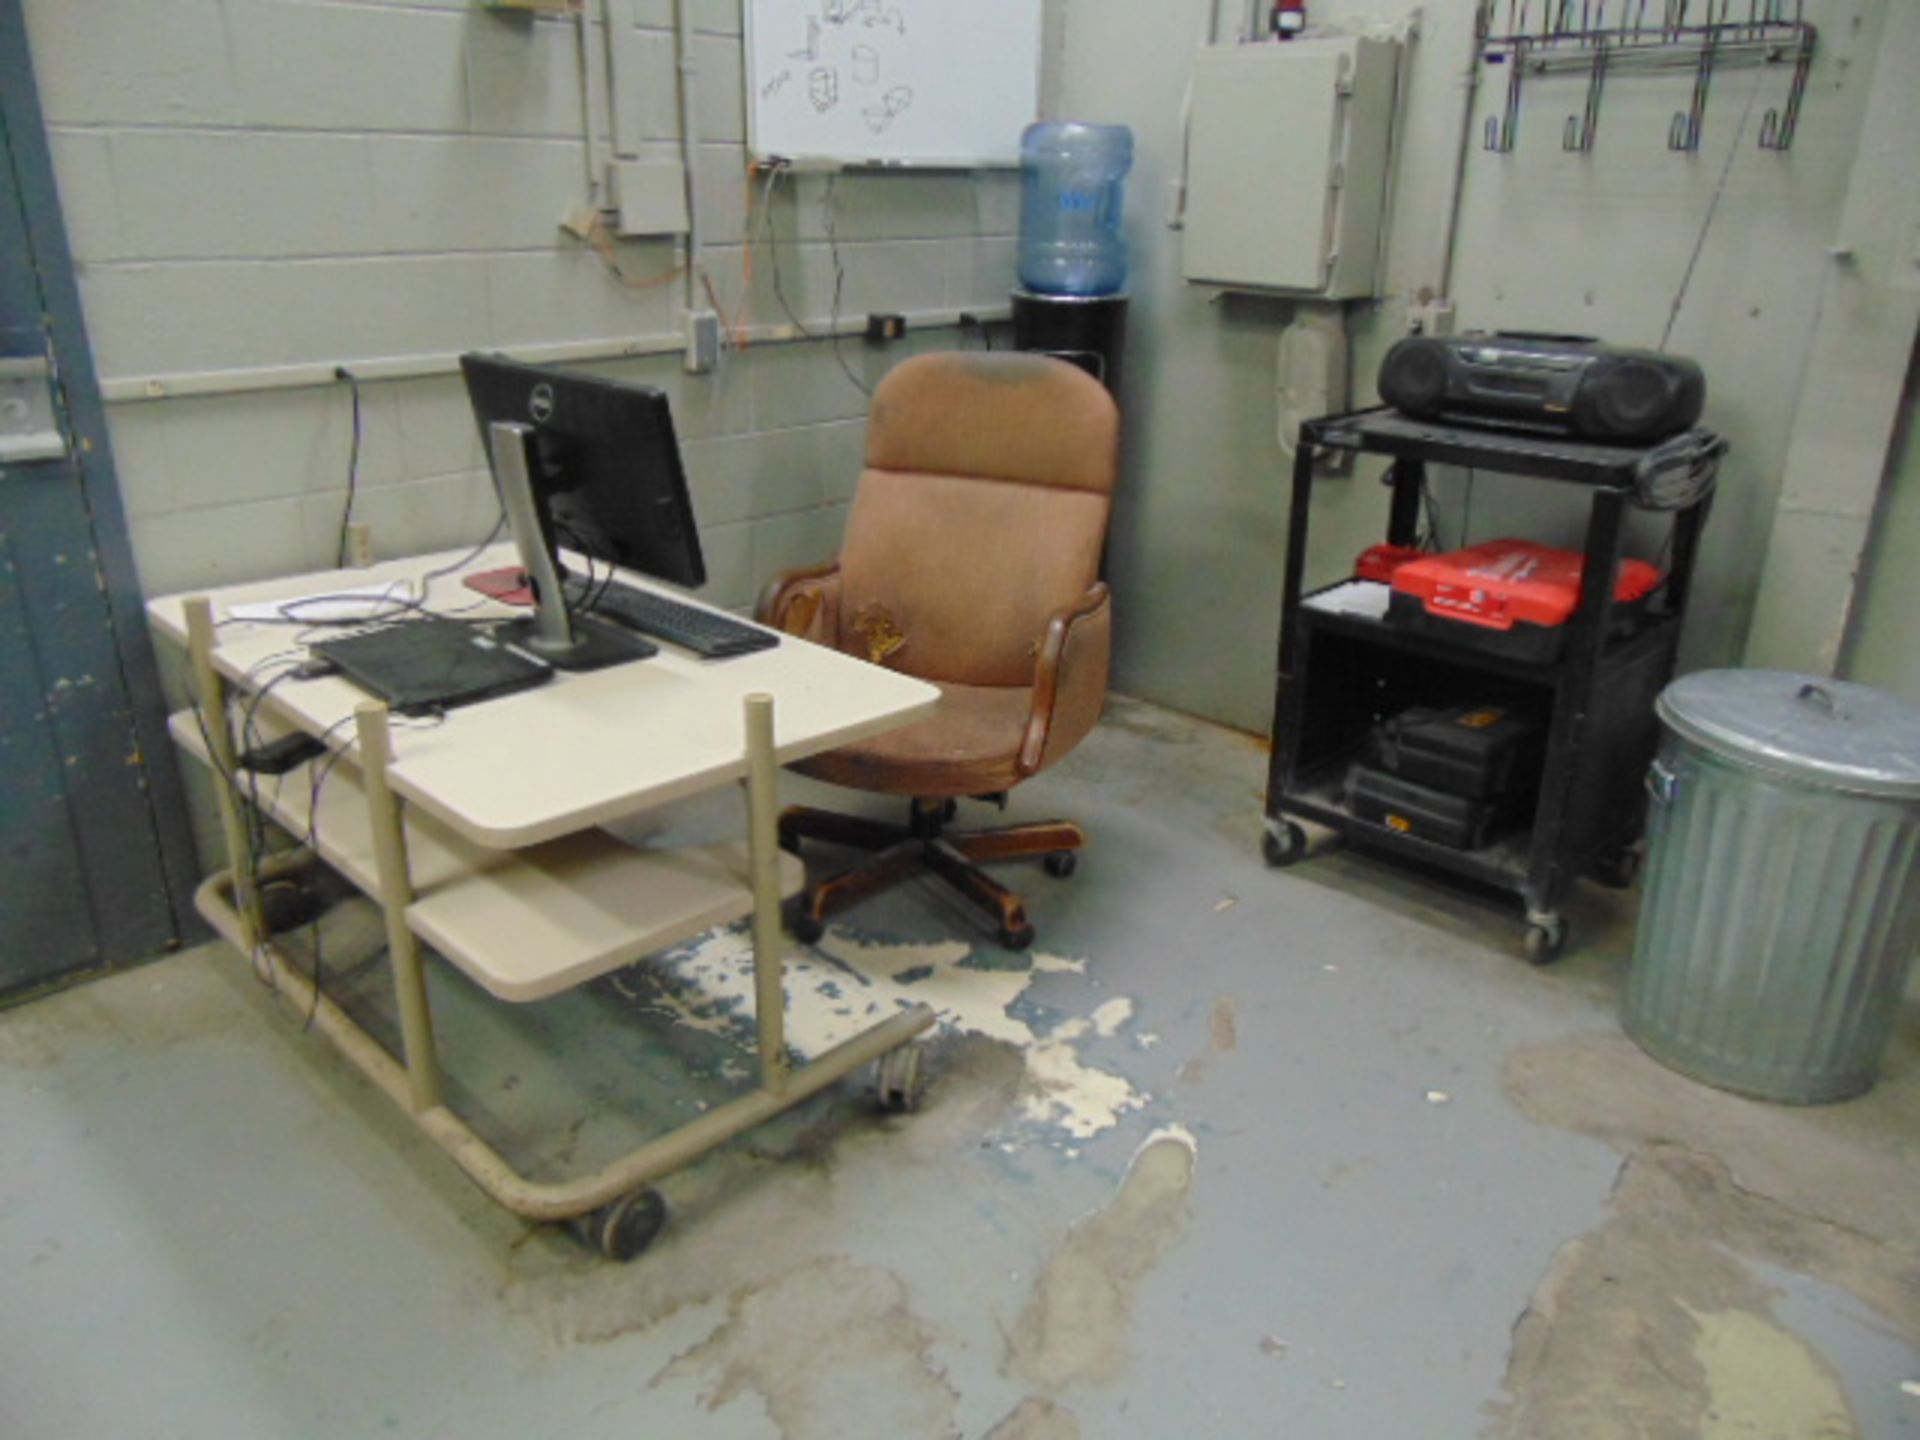 LOT CONTENTS OF OFFICE: 2.5' x 6' workbench, w/ vise, 2.5' x 4' table, (3) file cabinets, storage